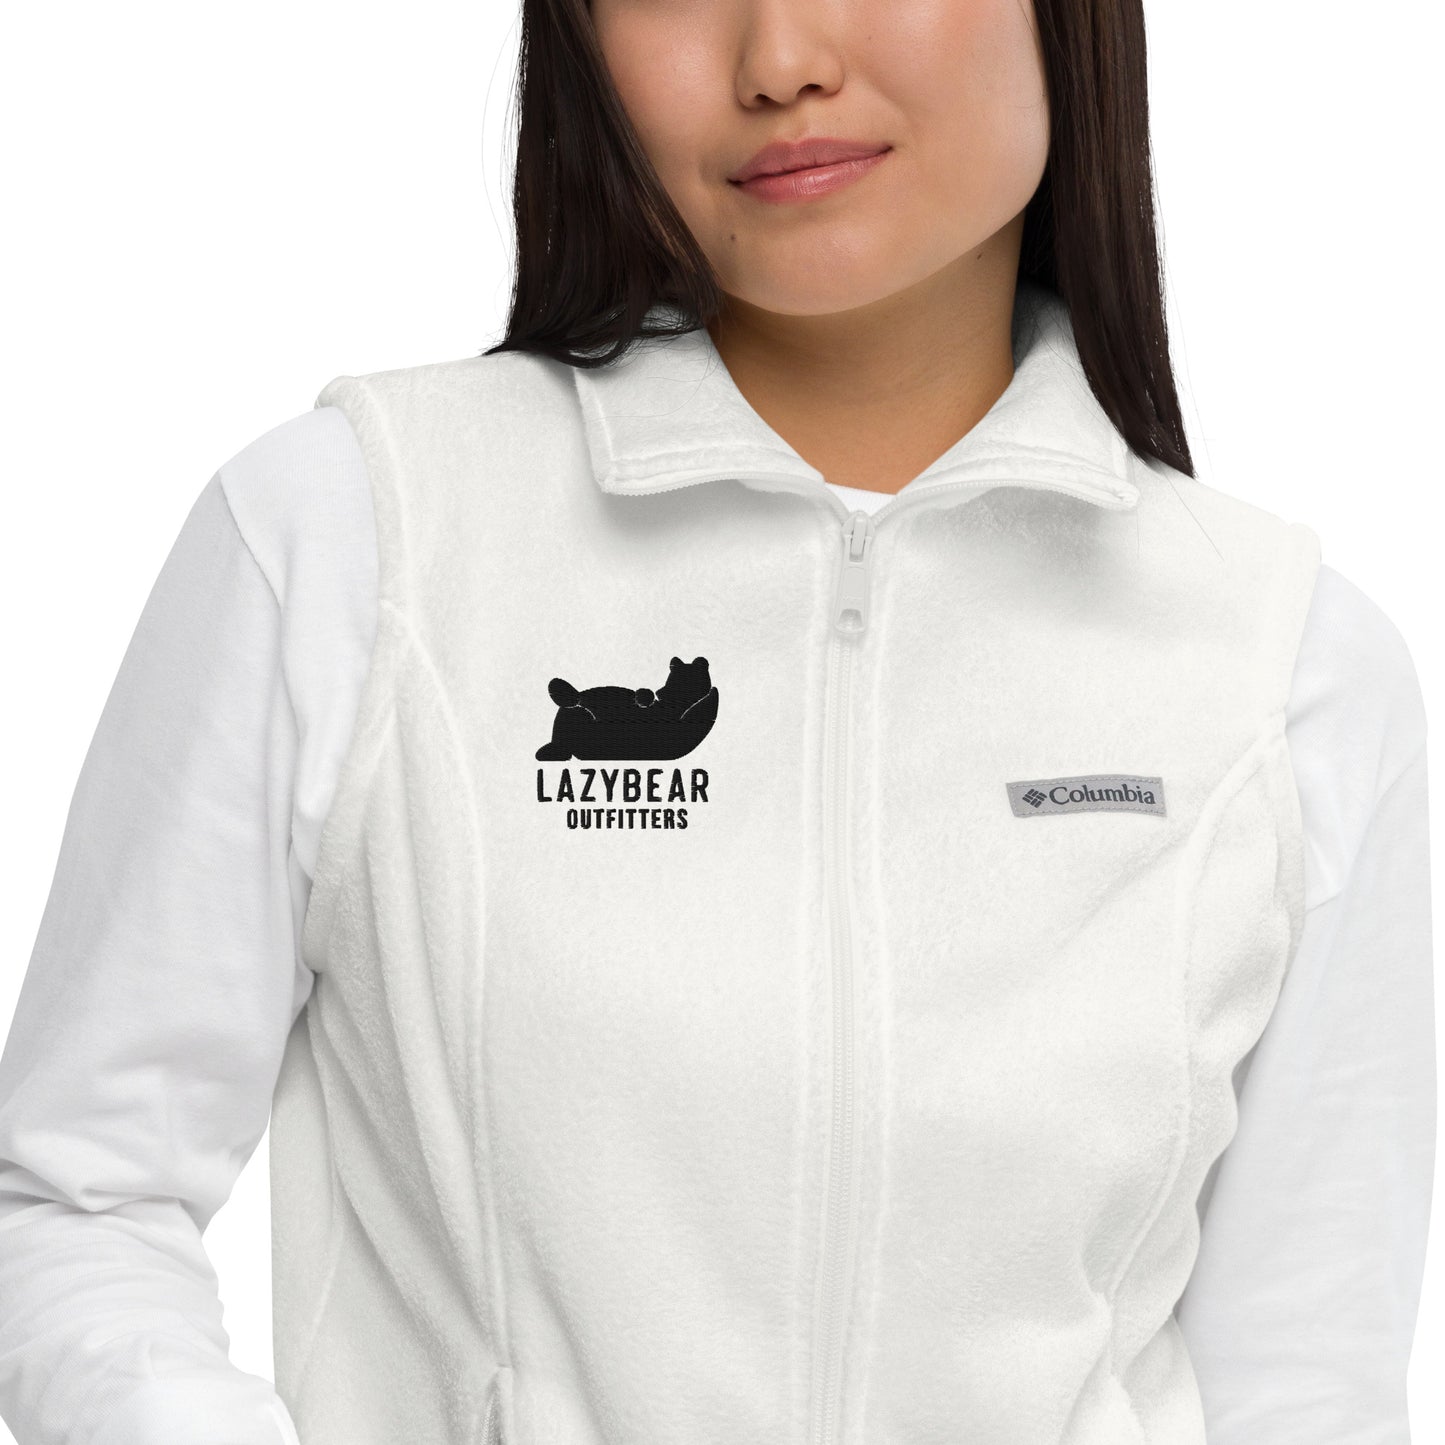 Women’s Lazy Bear Outfitters x Columbia Fleece Vest (white with black logo)